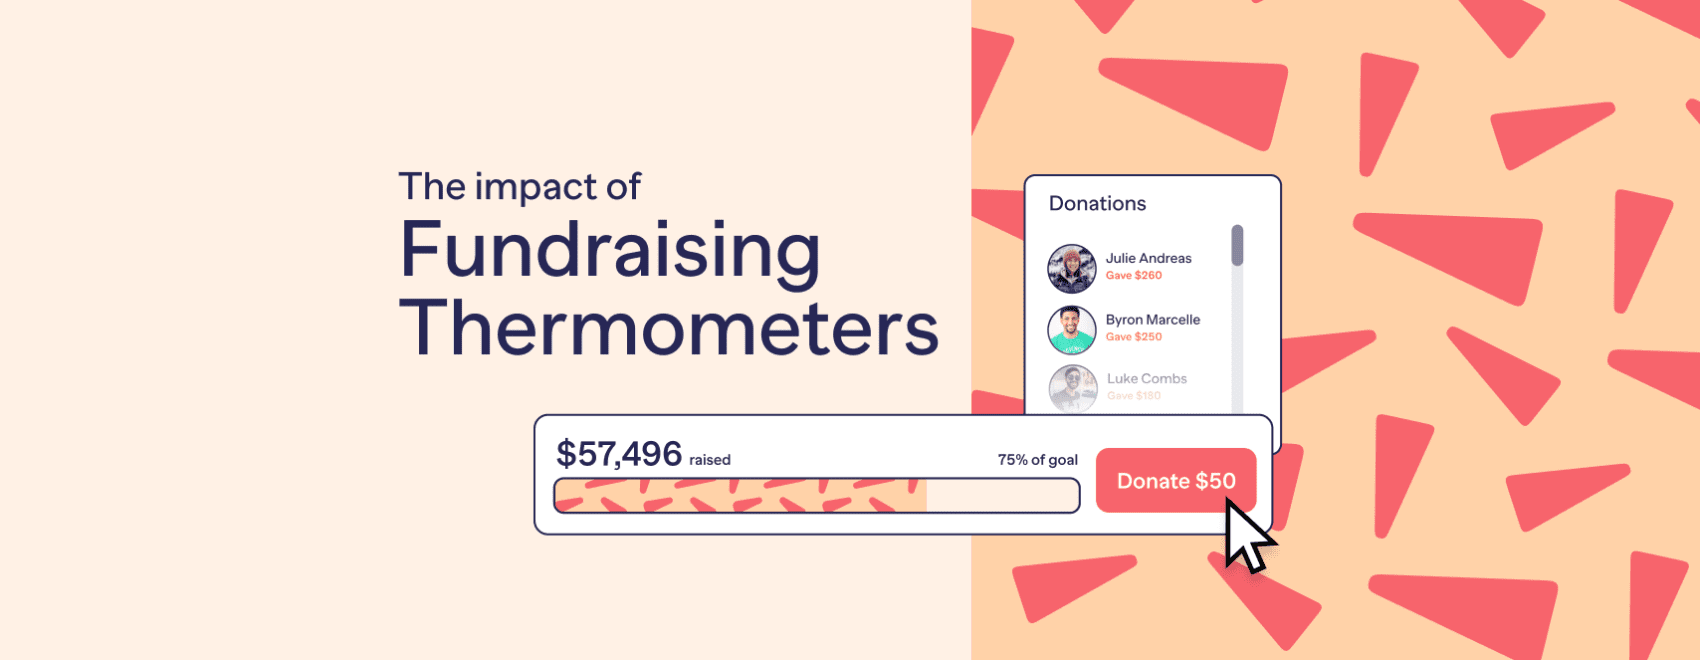 Fundraising Thermometerr